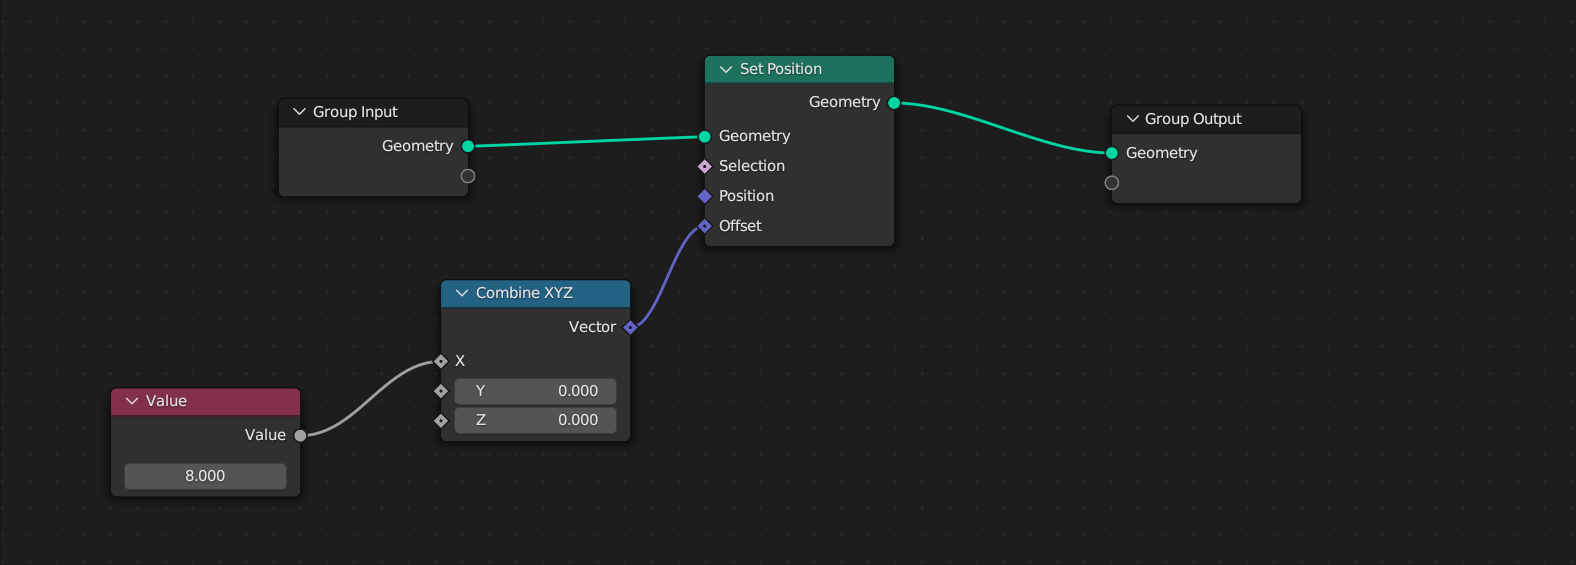 Example of Geometry Nodes in Blender from the node graph editor. Multiple different nodes are connected to each other through various inputs and outputs.